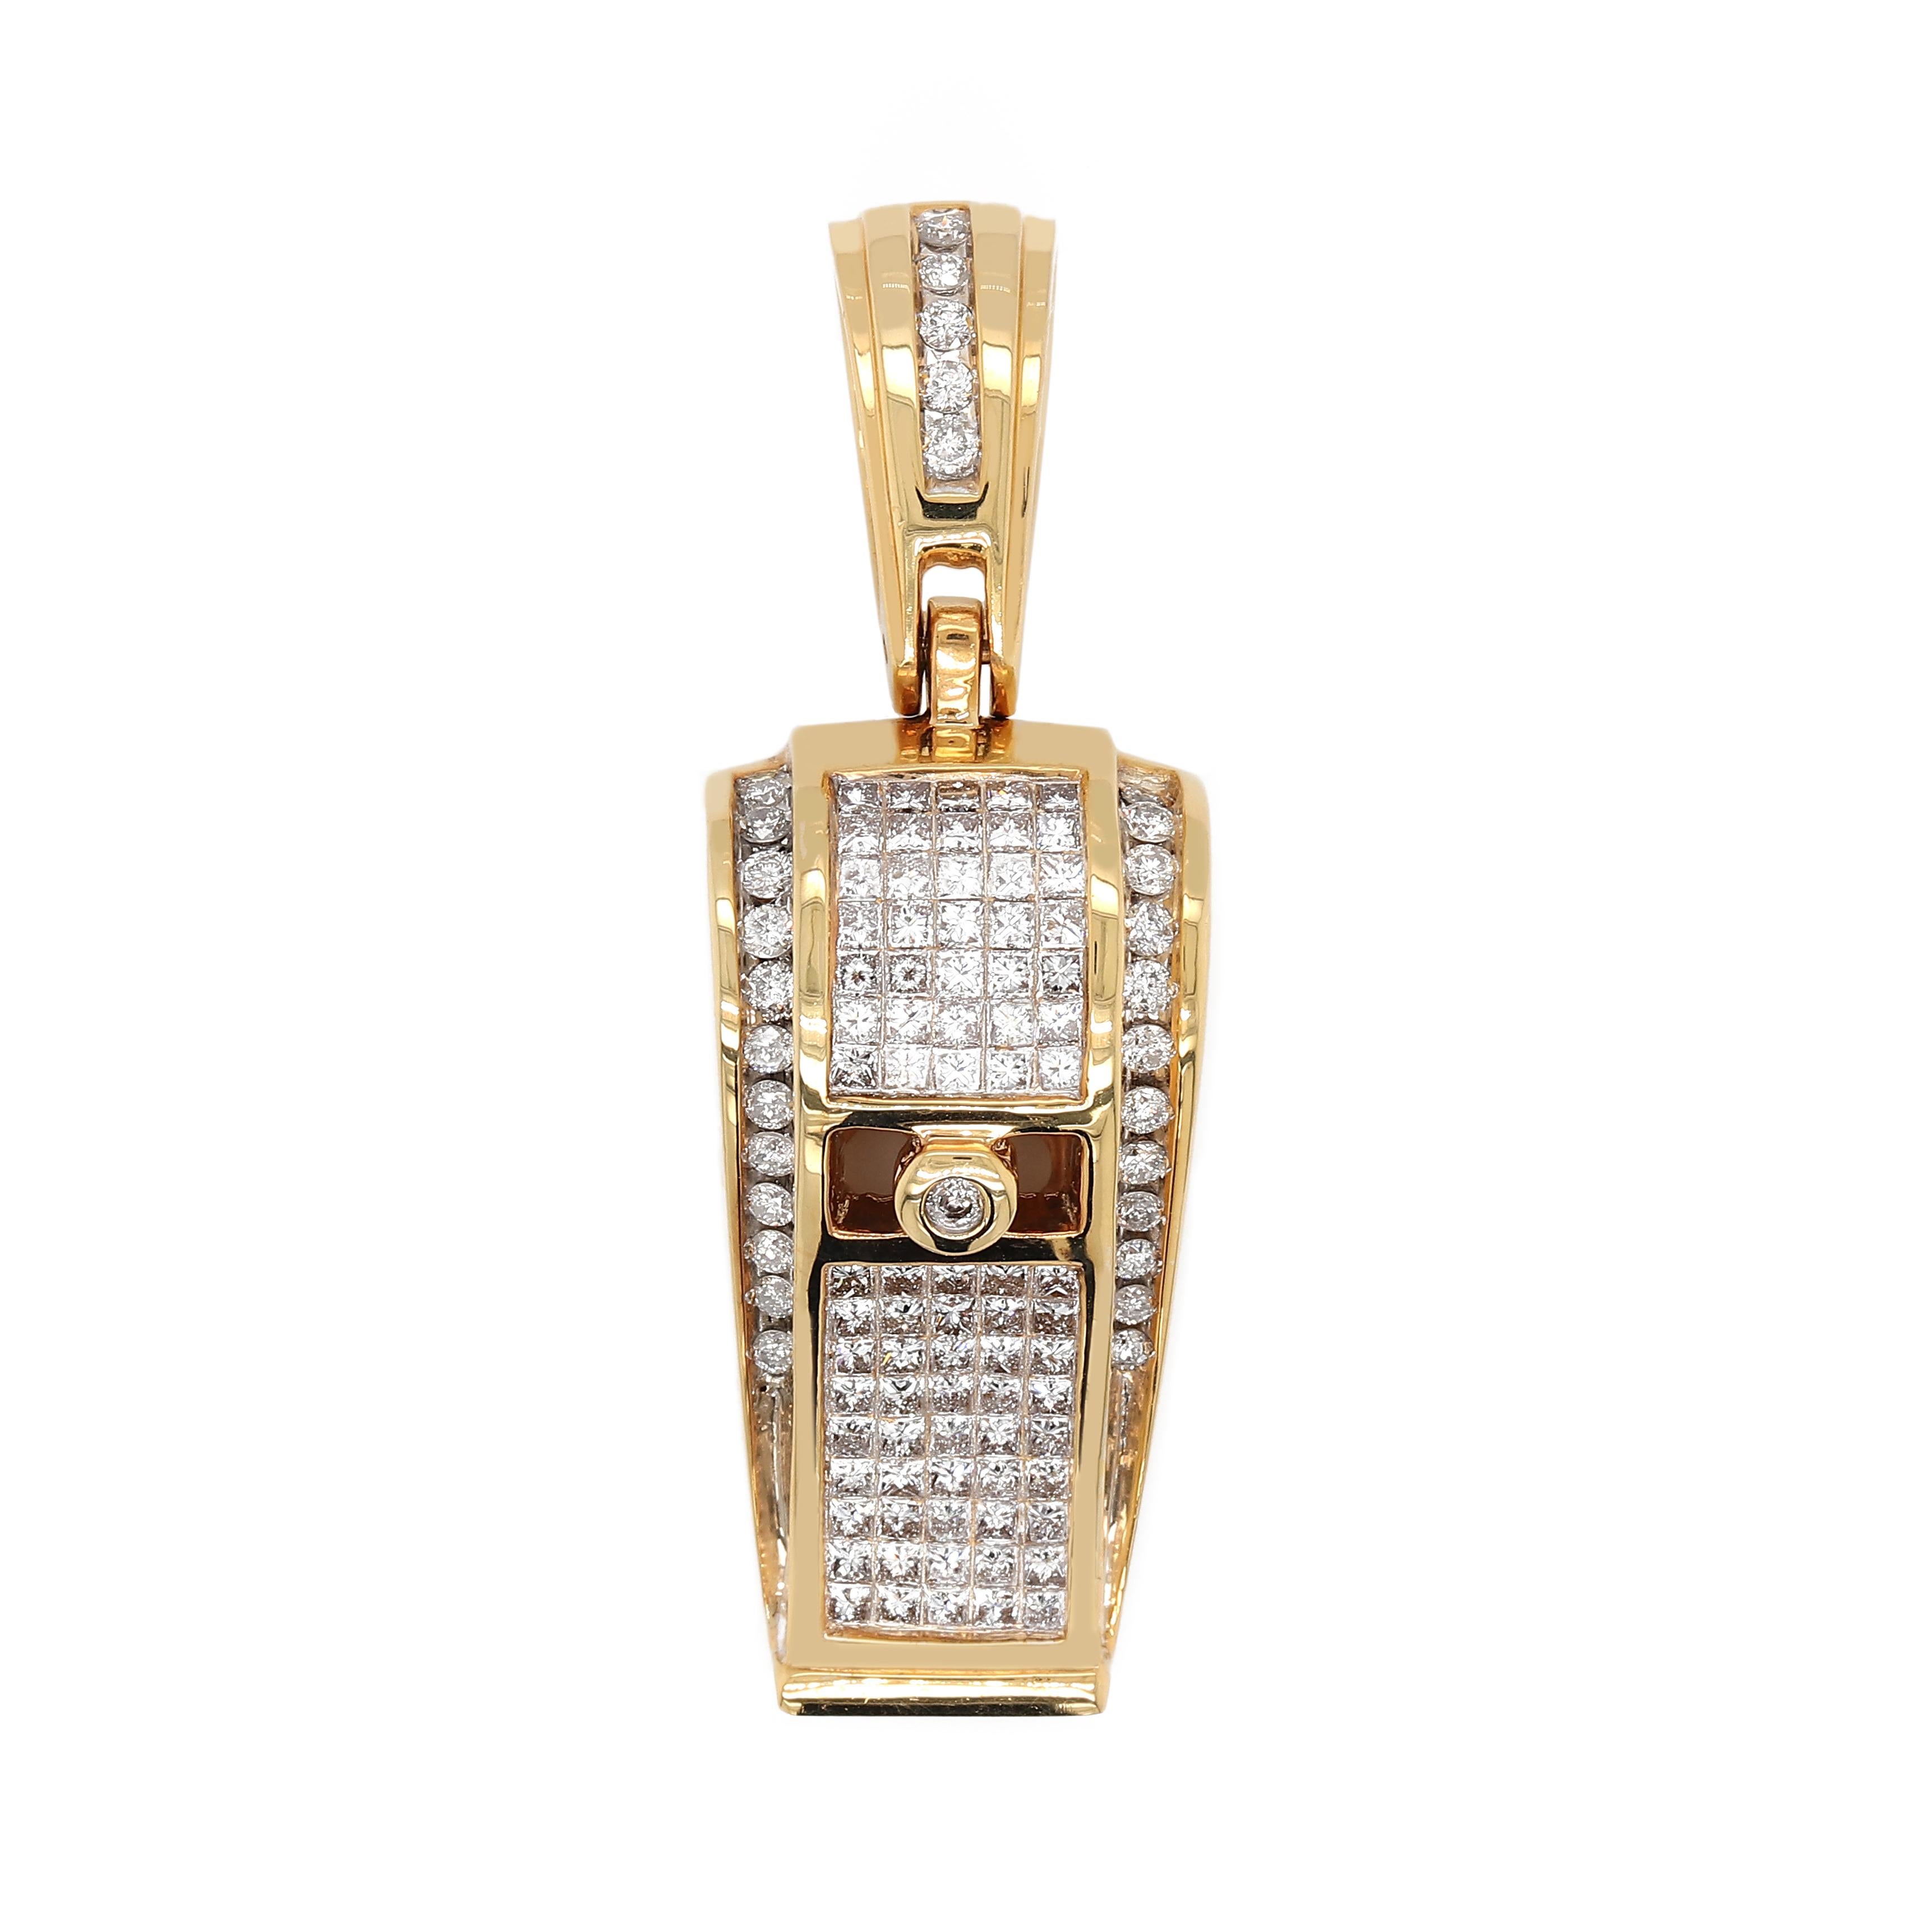 Whistle pendant including 80 princess cut diamonds of about 2.60ct and 30 round brilliant cut diamonds of about 0.65ct with a clarity of VS and color G. All diamonds are set in 14k yellow gold. The total weight of the pendant is approximately 16.00